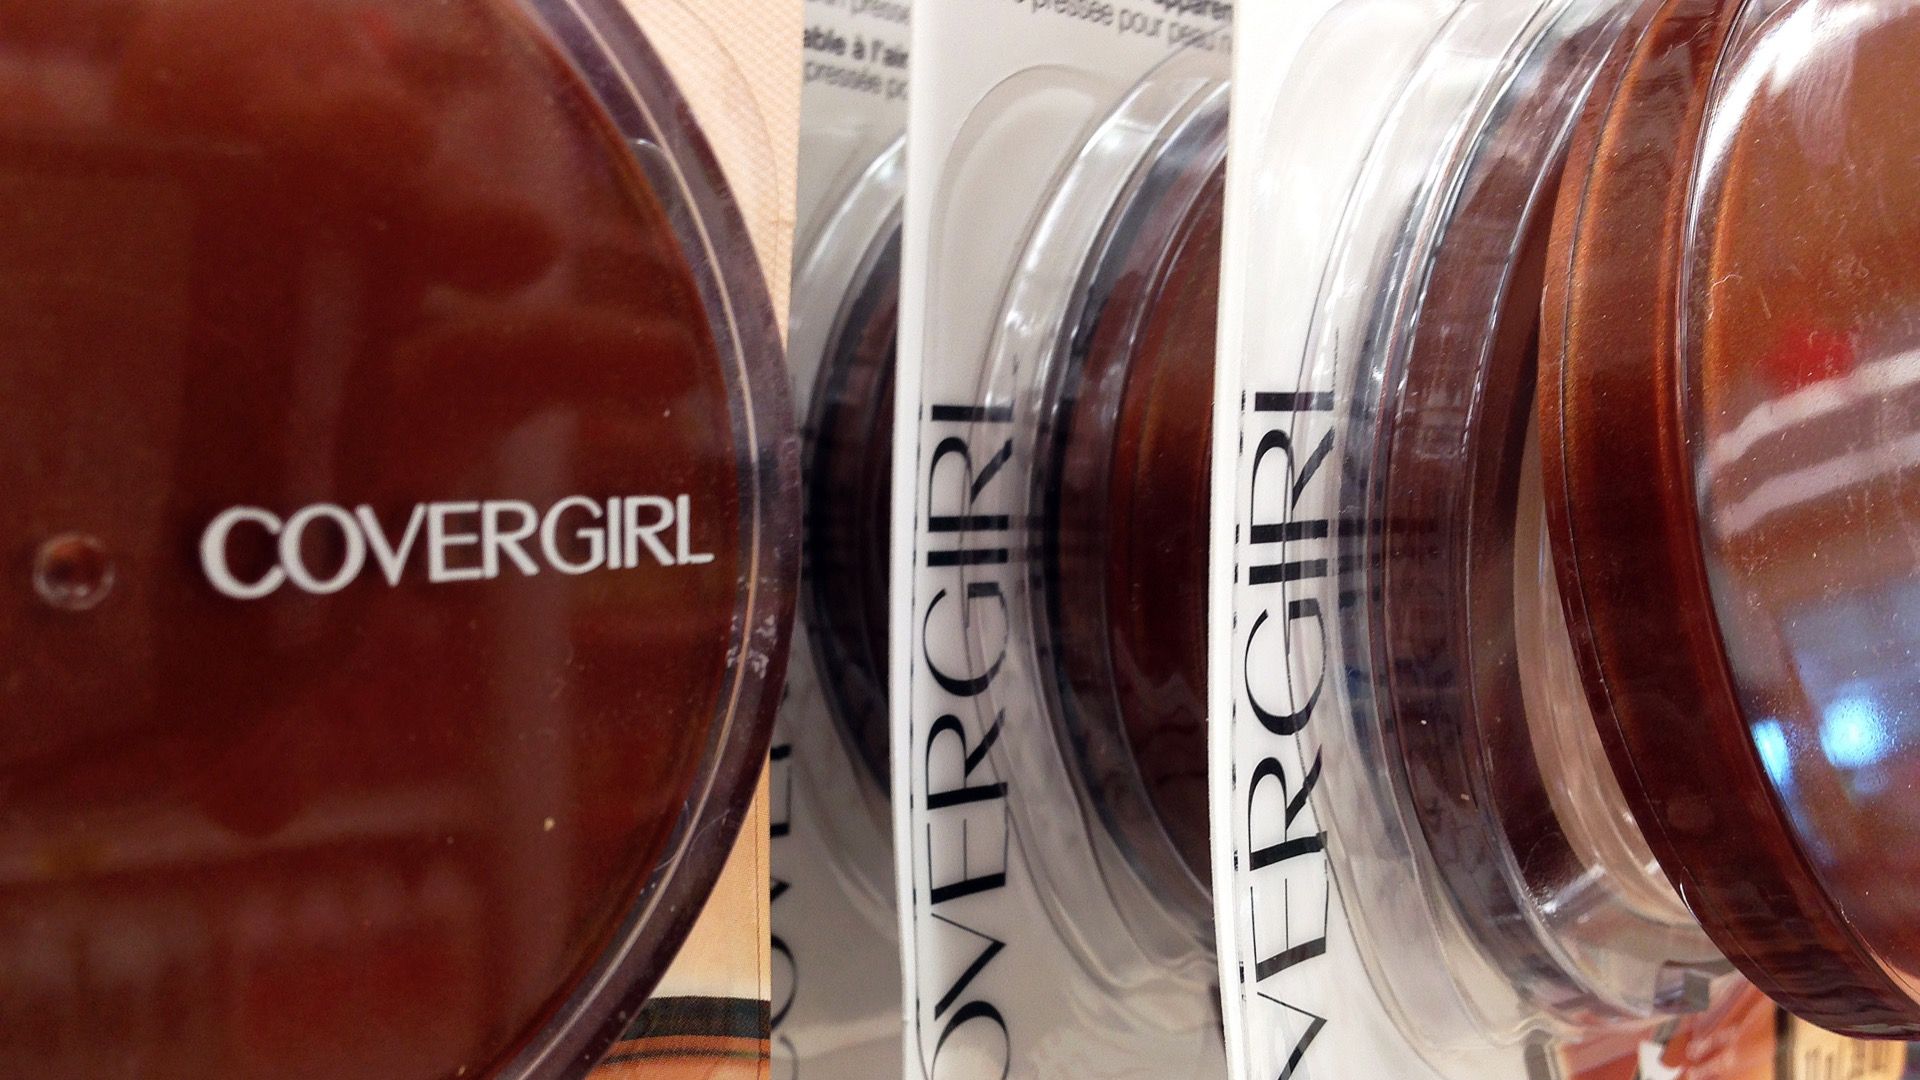 Covergirl makeup is displayed in a shopping aisle